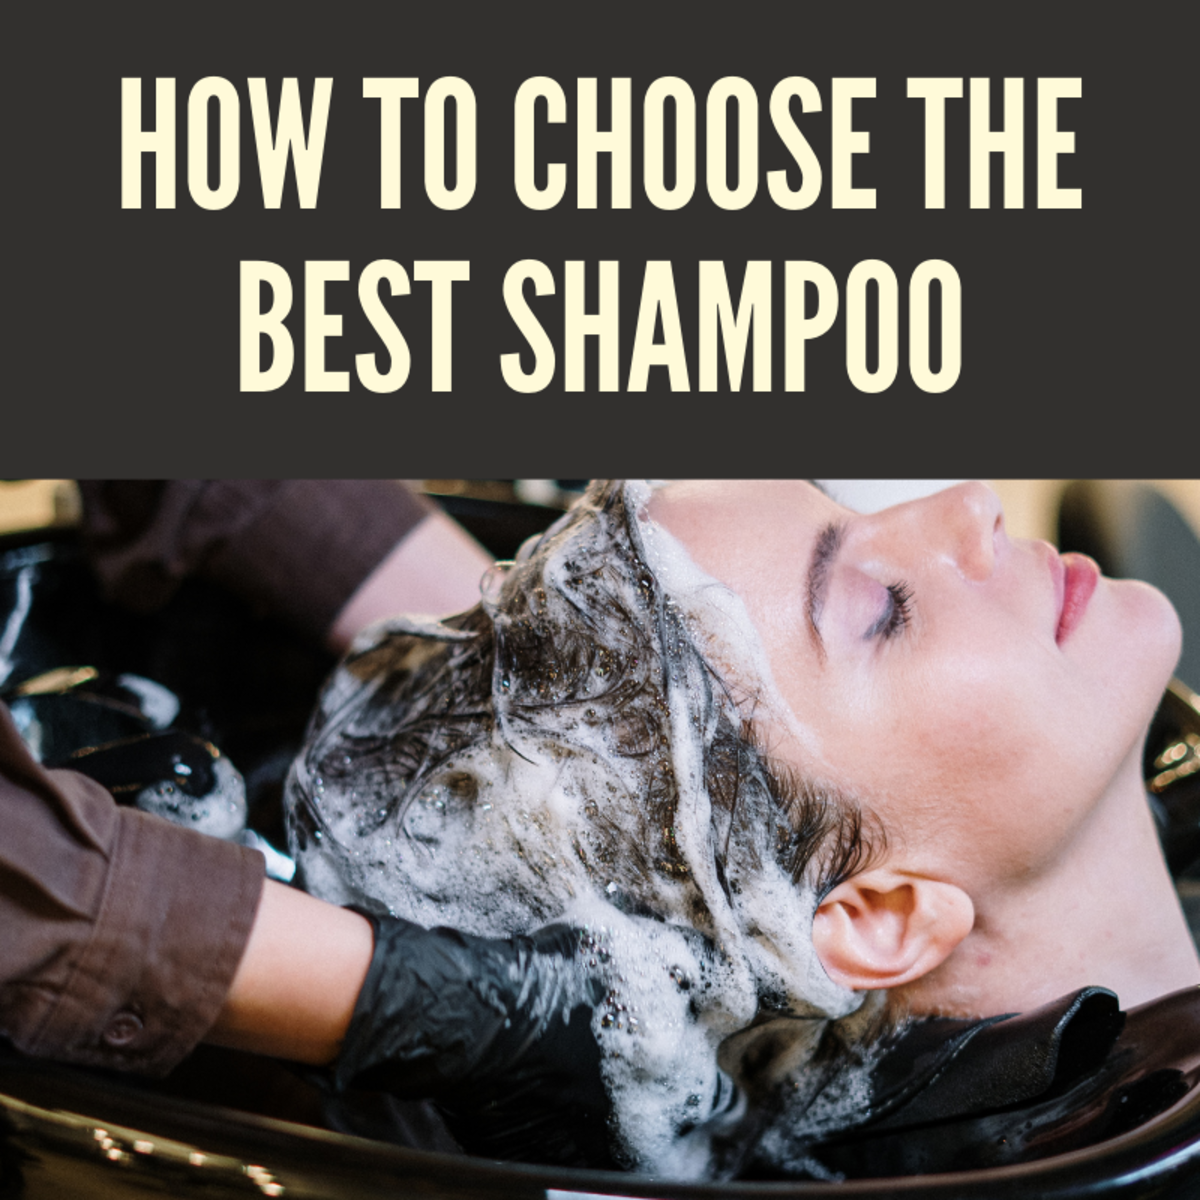 How to Choose the Best Shampoo